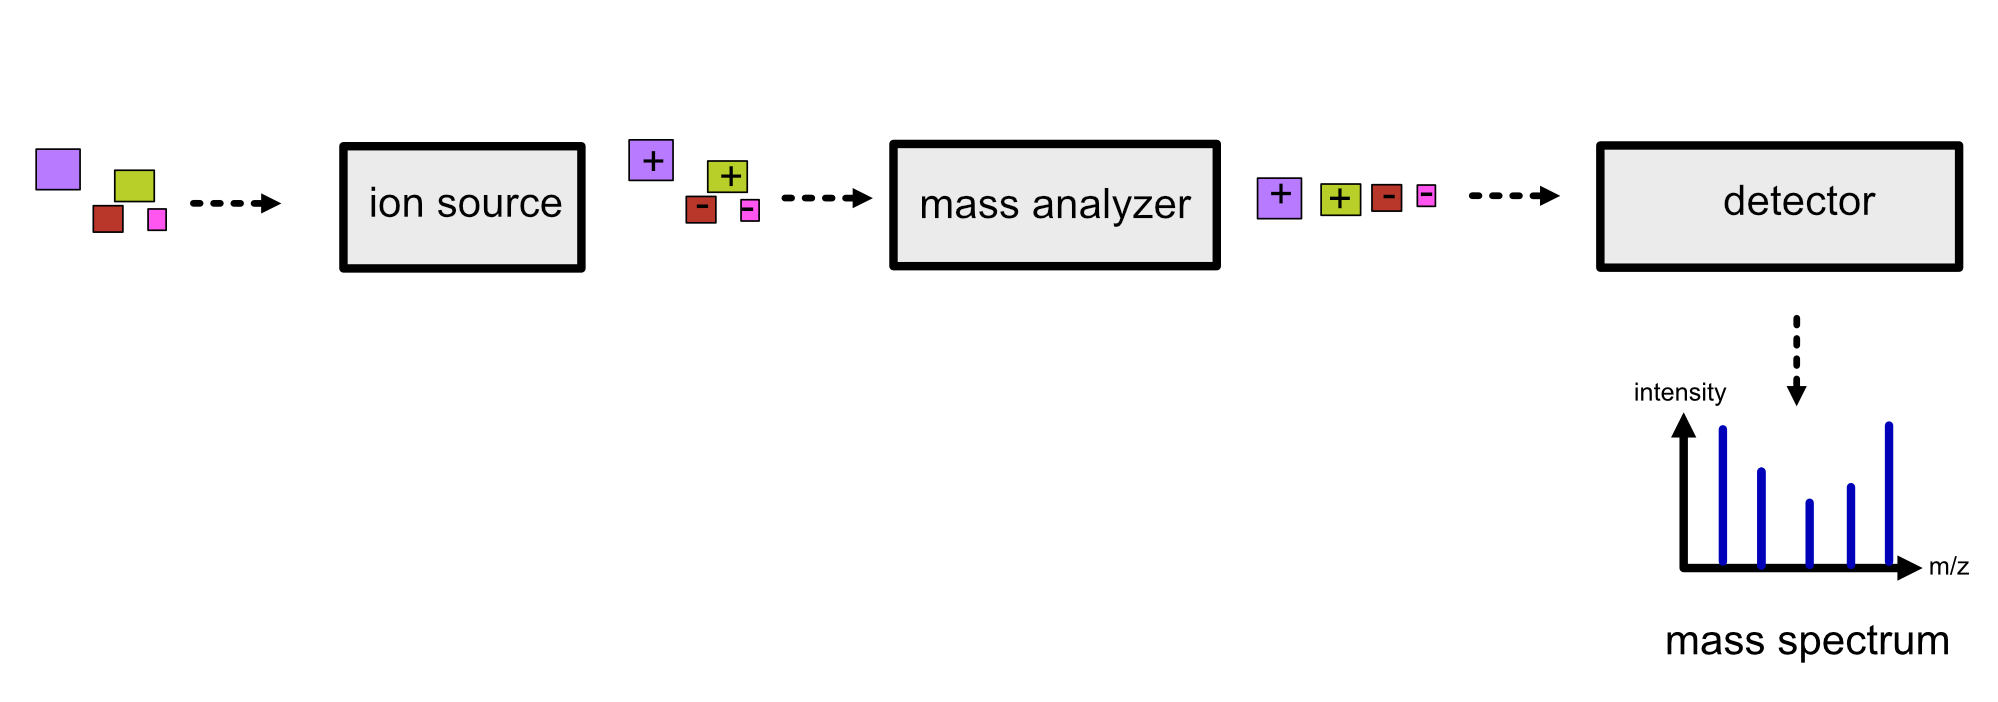 ../_images/mass-spectrometry-components.png